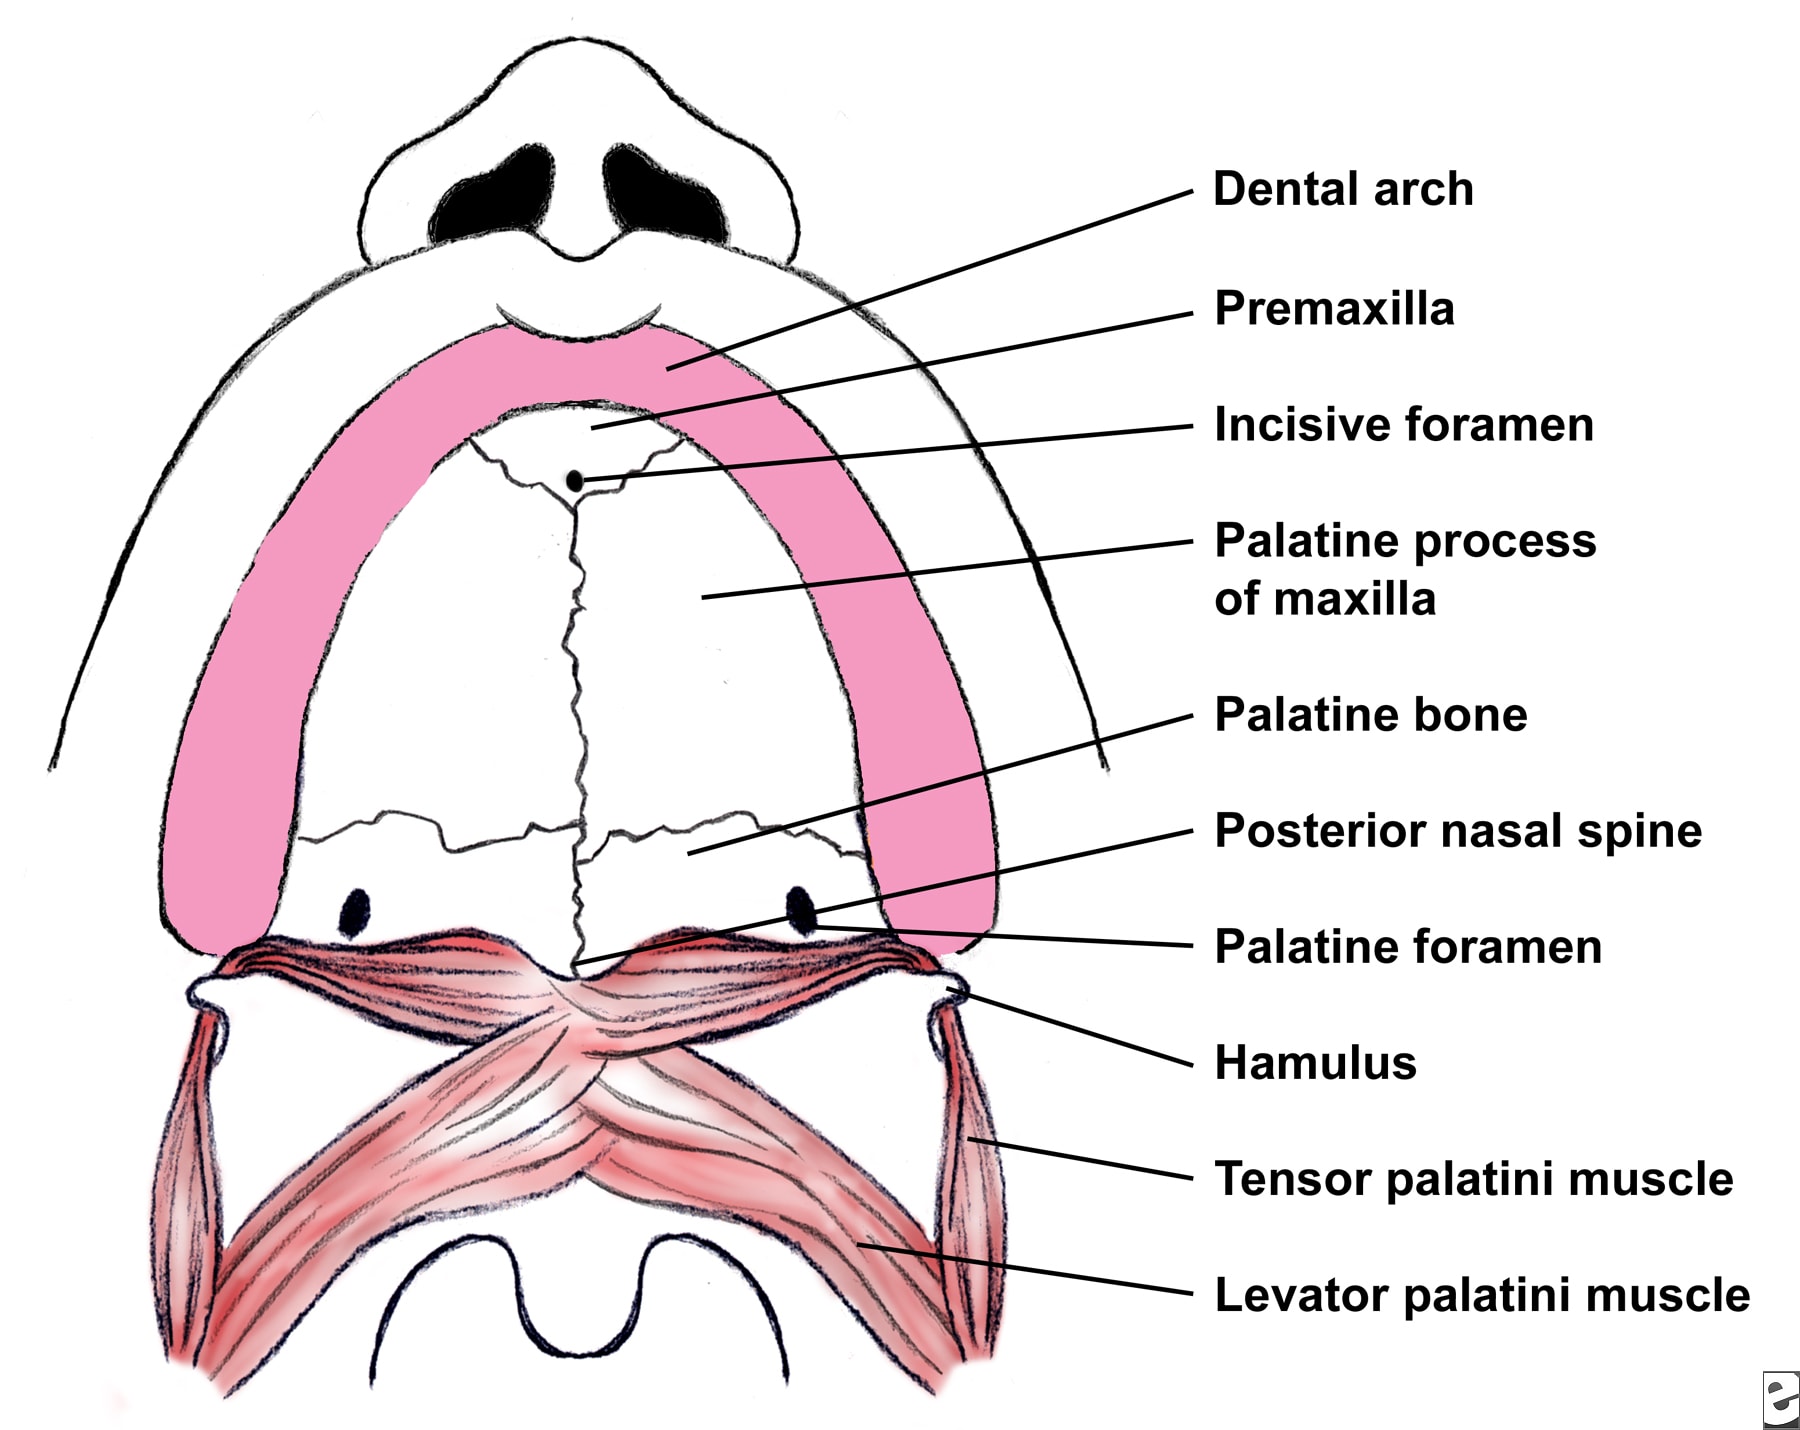 Oral And Maxillo Facial Surgery Congenital Malformations Mouth And Pharynx